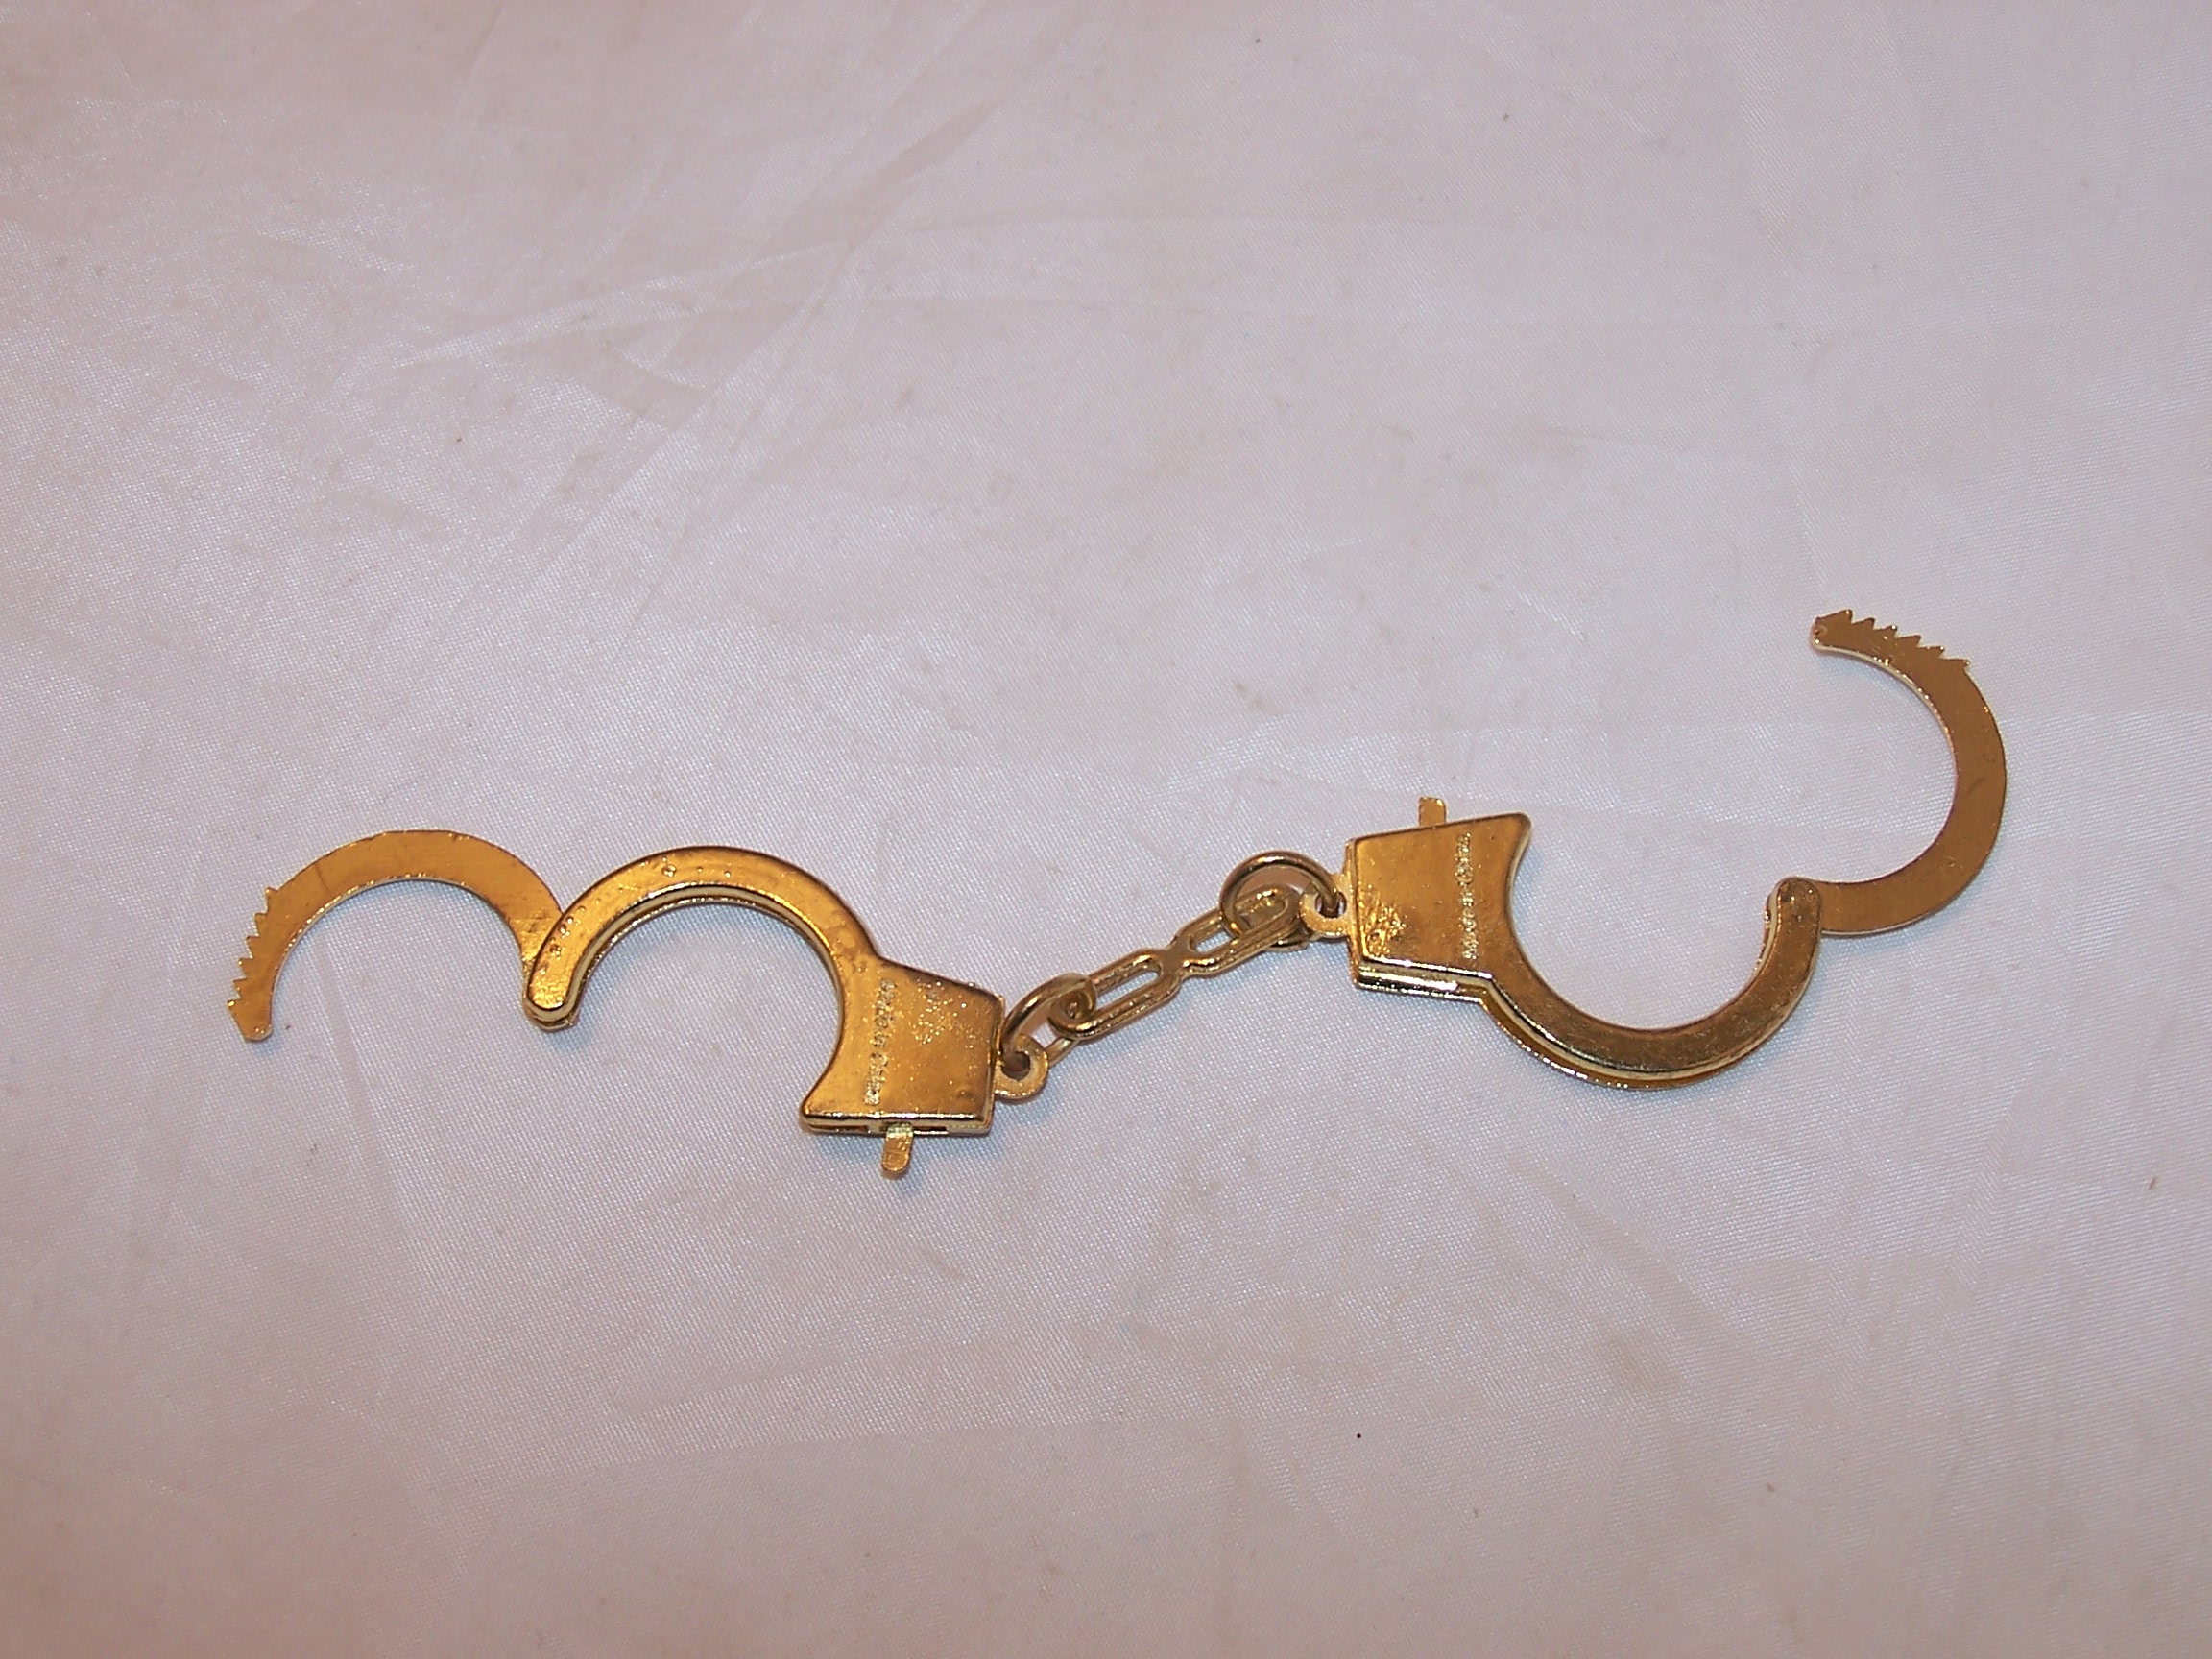 Image 1 of Handcuffs, Miniature Gold, Metal